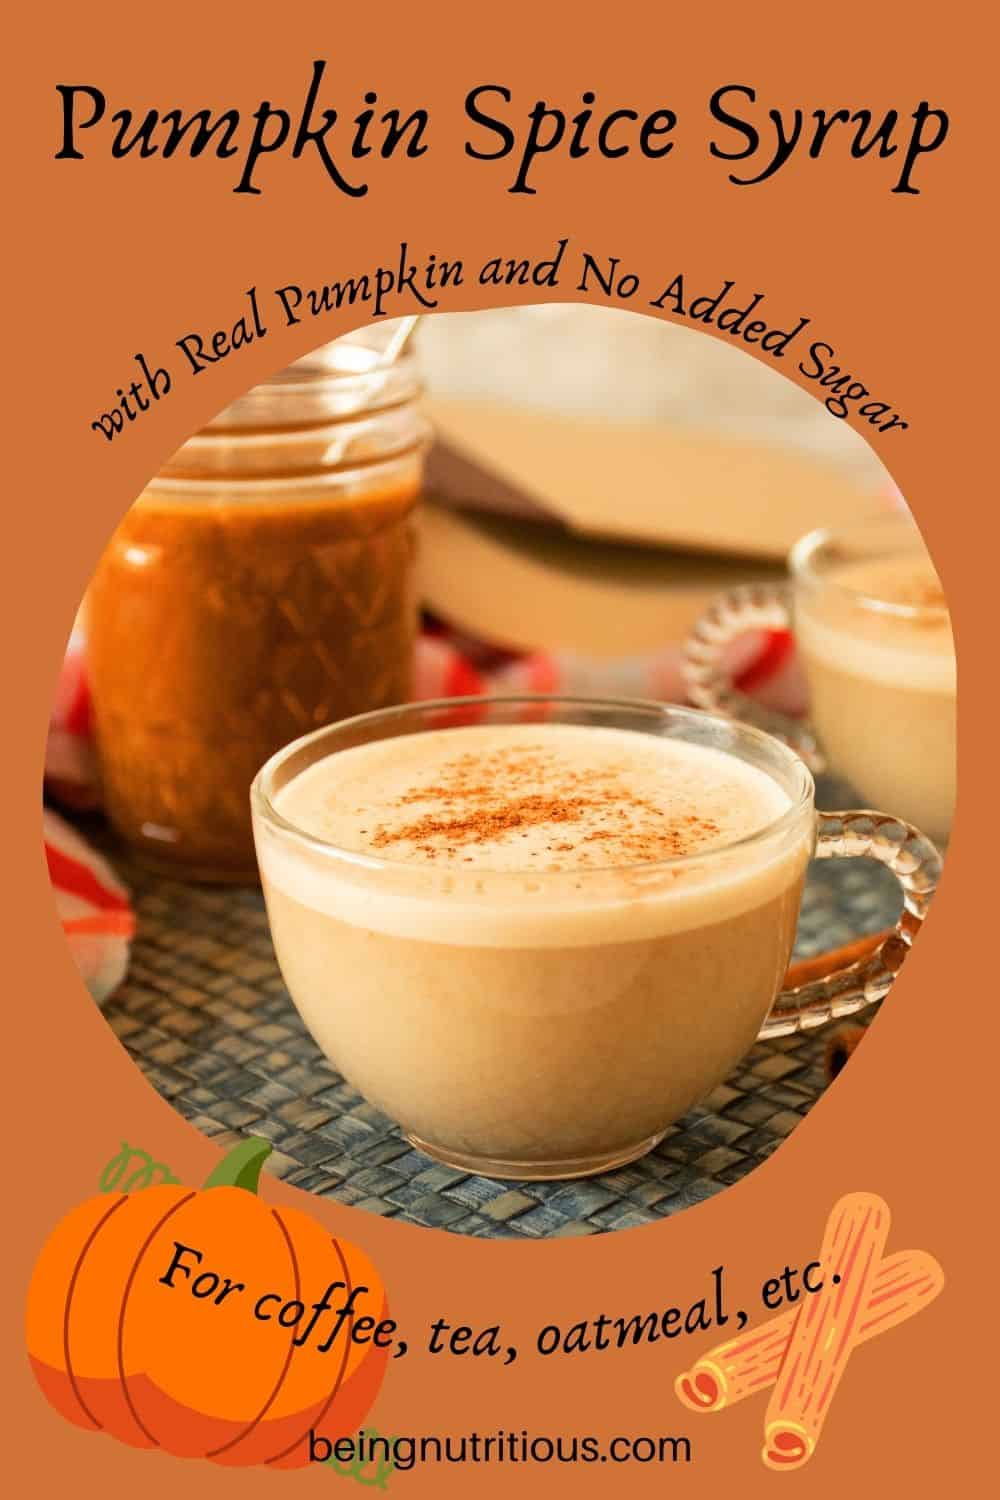 Small cup of a latte with a jar of pumpkin spice syrup in the background. Text around picture: Pumpkin Spice Syrup with real pumpkin and no added sugar. For coffee, tea, oatmeal, etc.